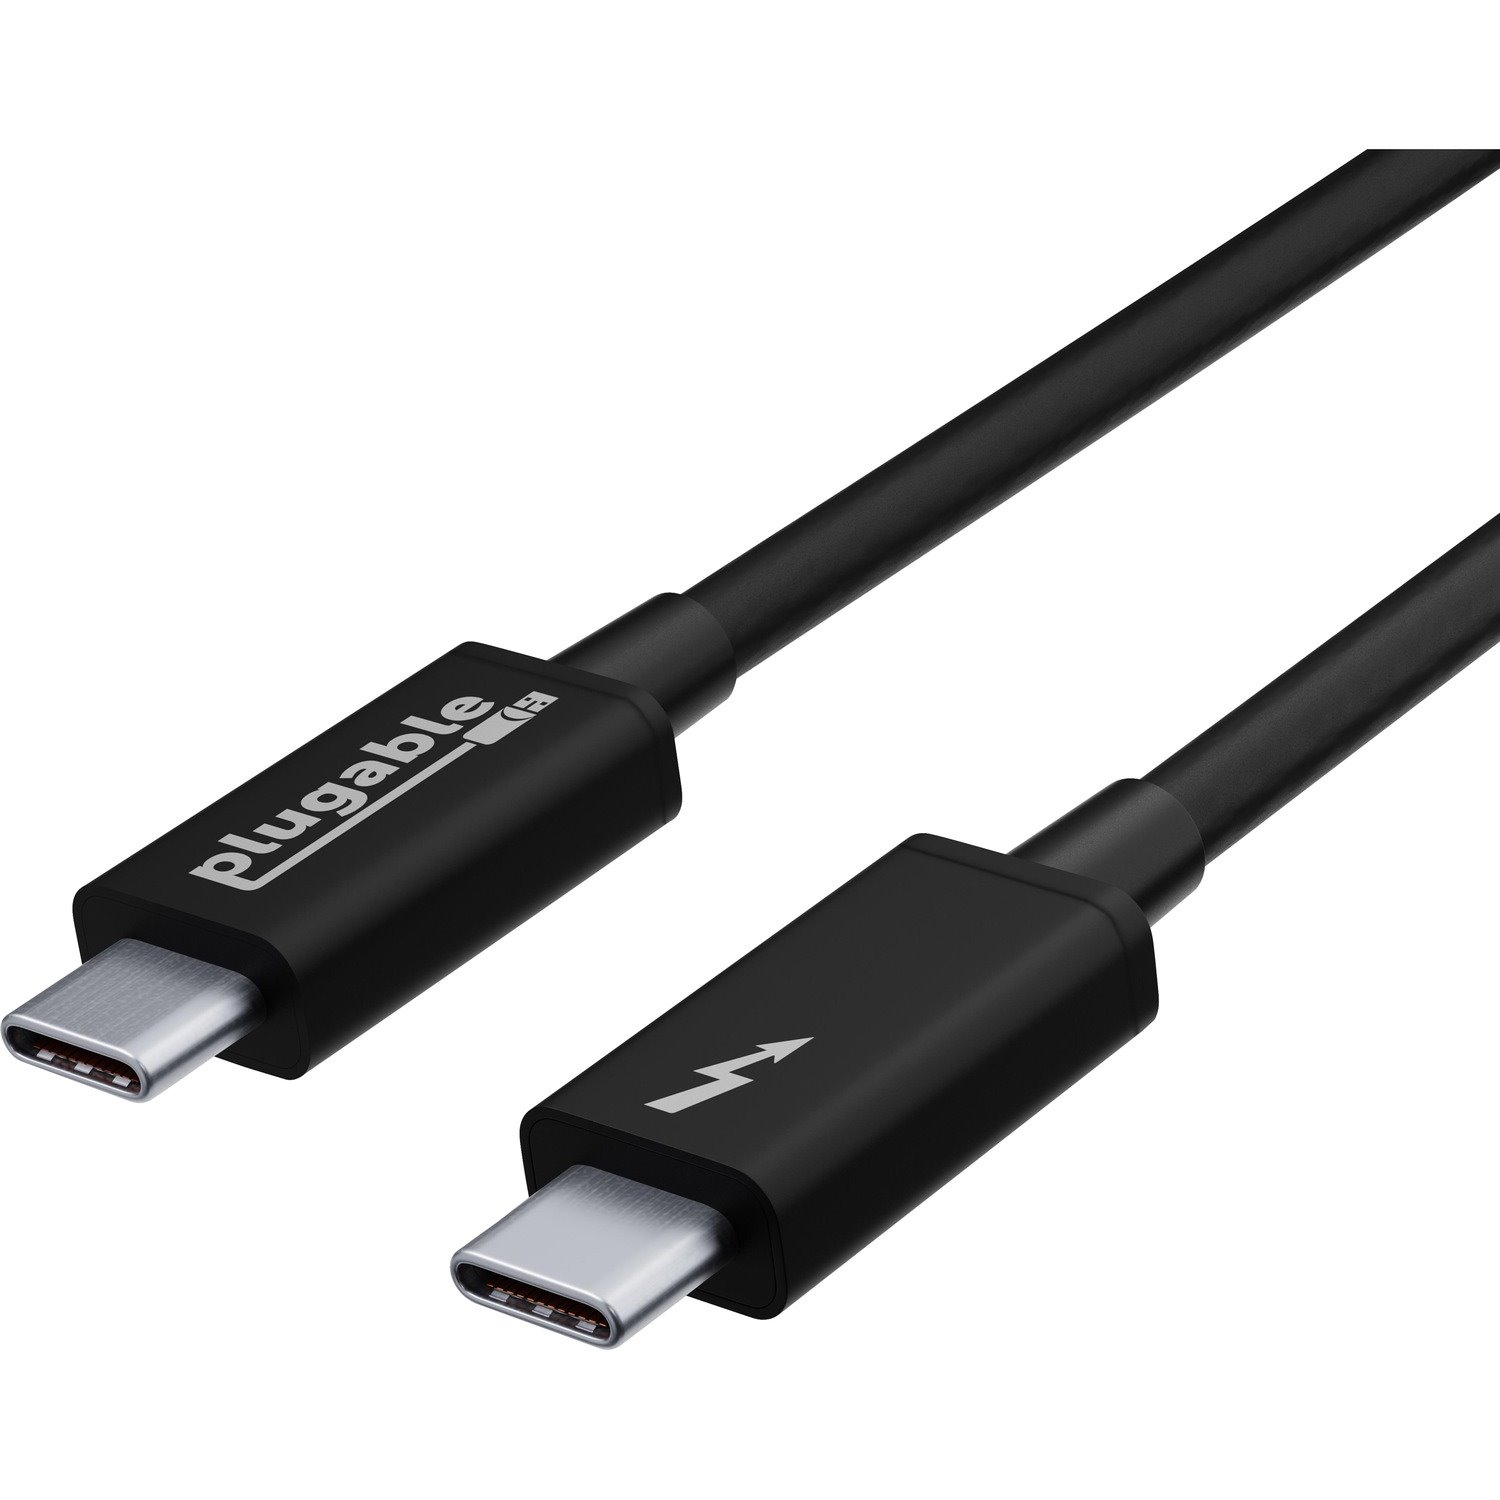 Plugable Thunderbolt 3 Cable 20Gbps Supports 100W (20V, 5A) Charging